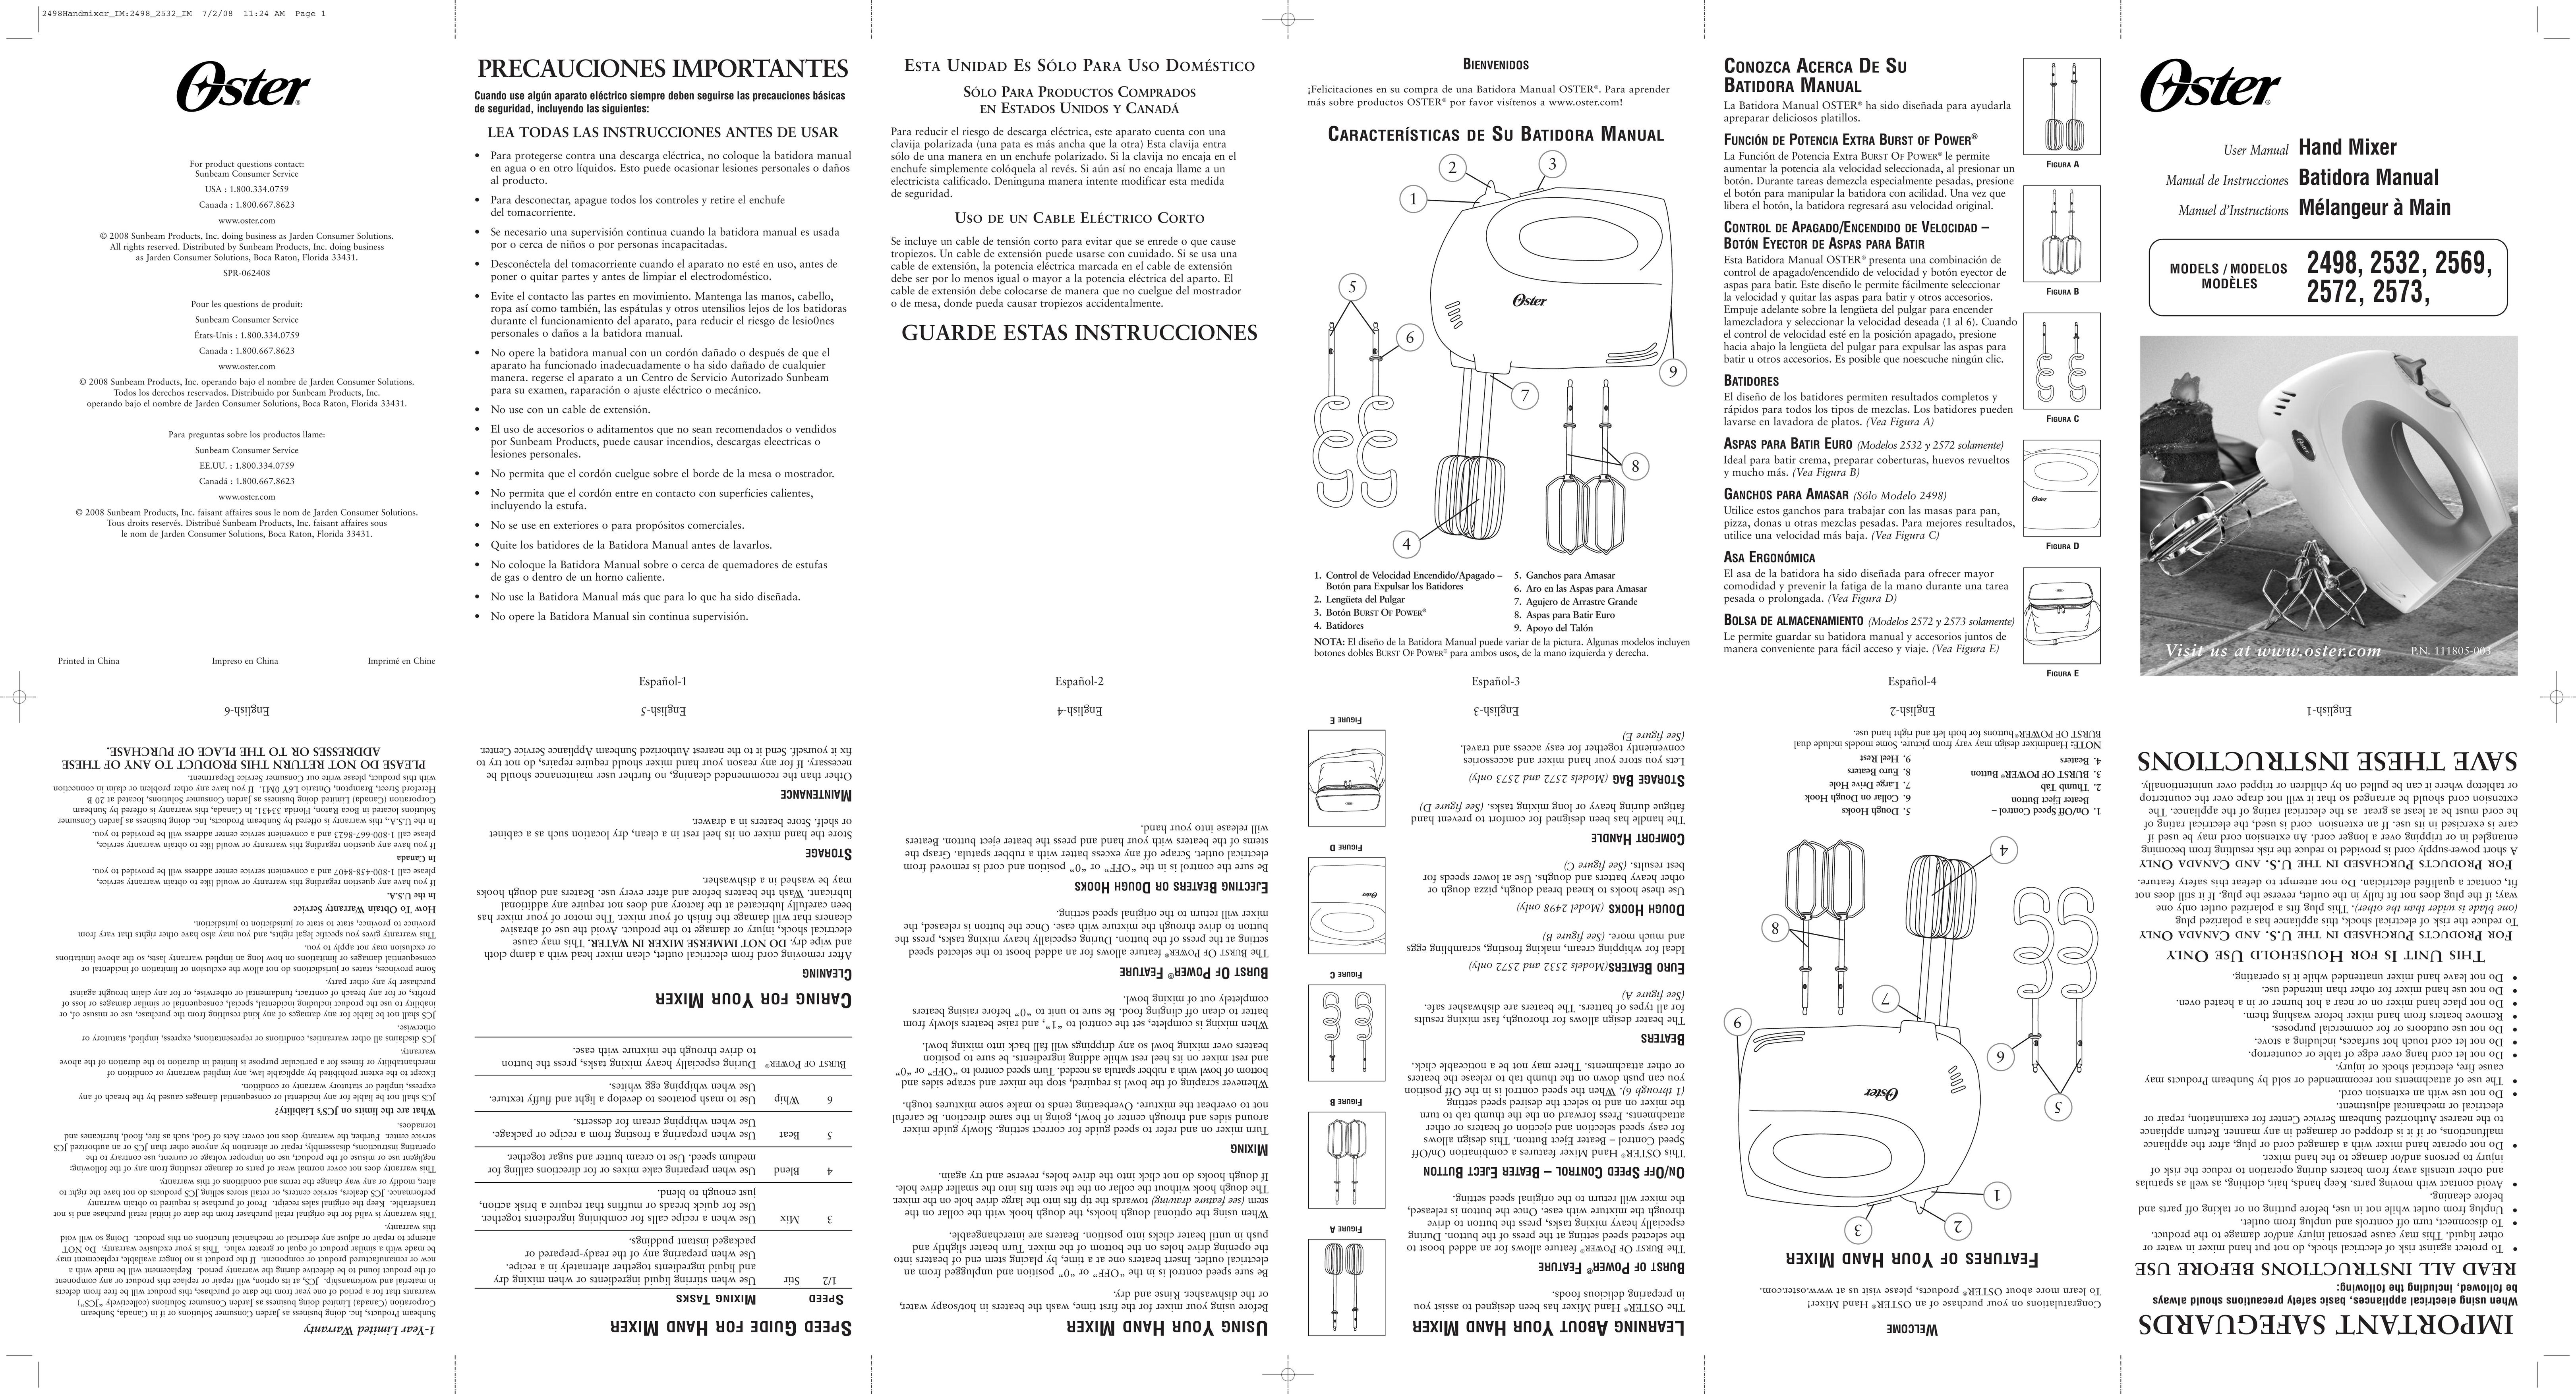 Oster 2573 Mixer User Manual (Page 1)